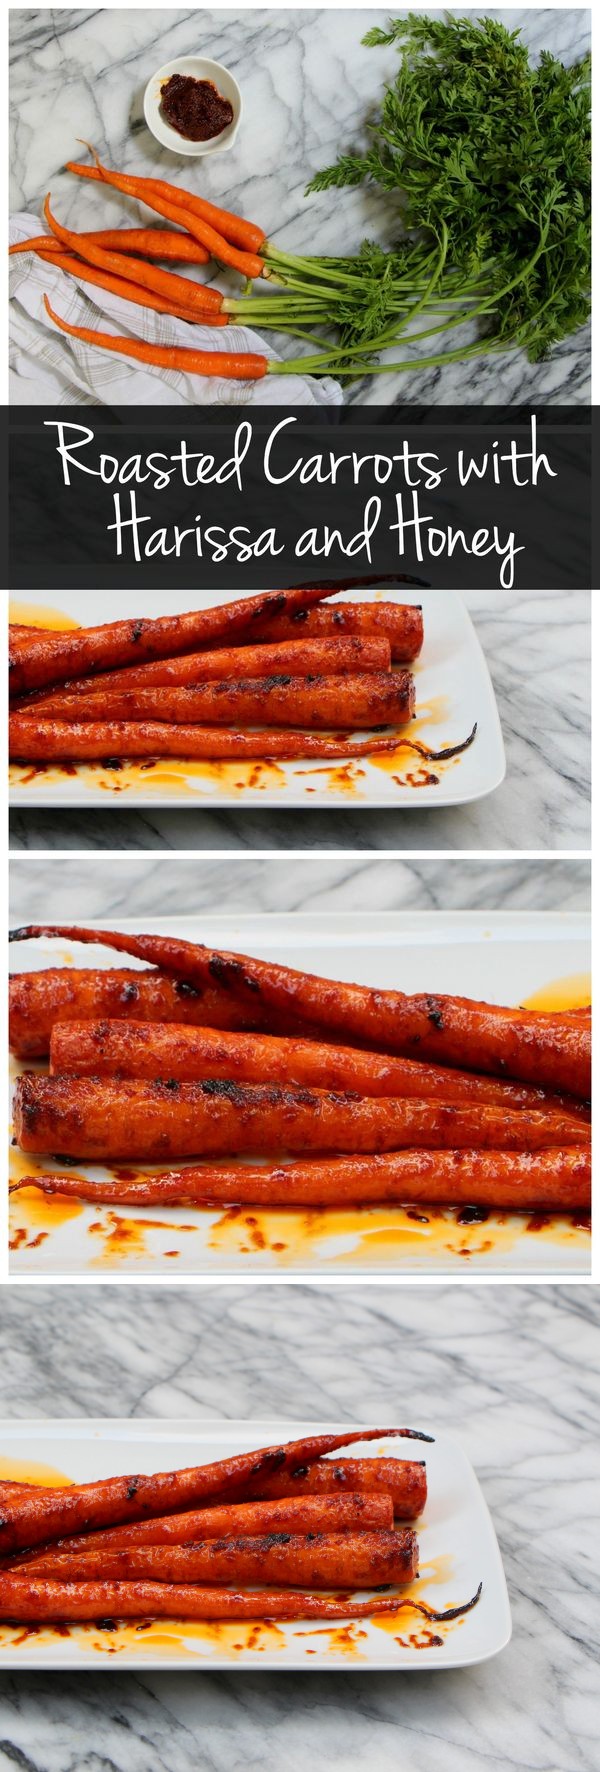 Roasted Carrots with Harissa and Honey